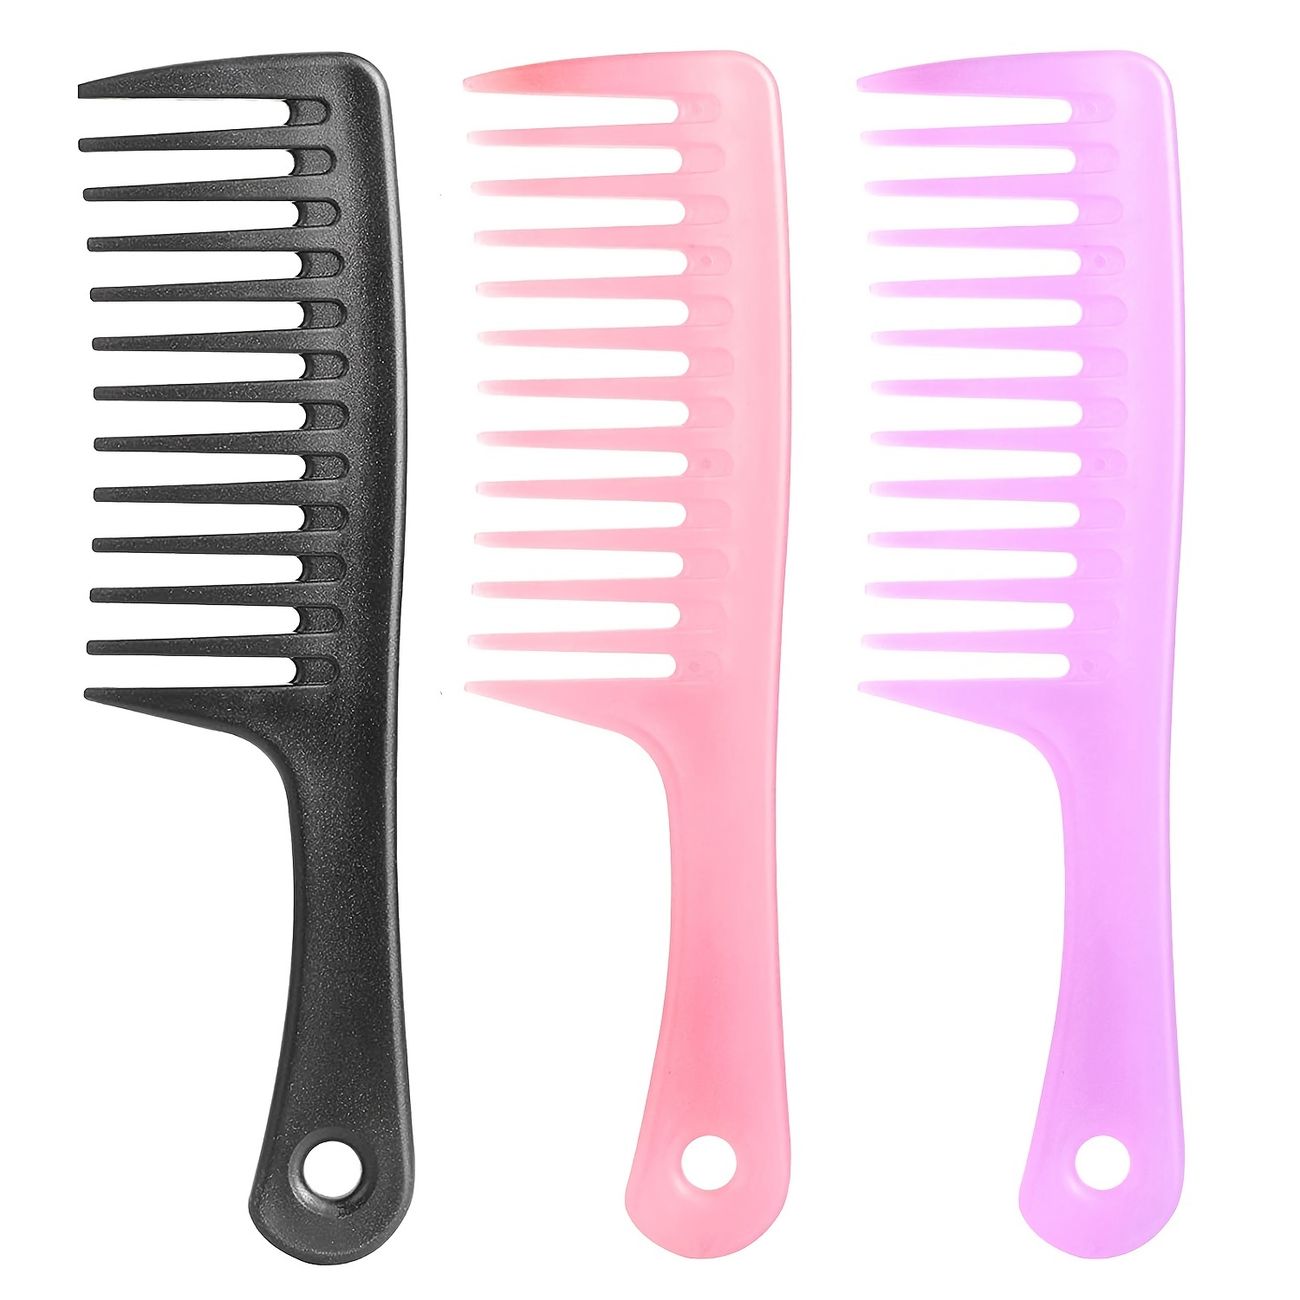 Buy 10 Hair Comb Set Salon Series Professional Plastic Hair Combs Hair  Salon Hair Styling Combs Set Kit Comb Kit With Transparent Pouch Organizer  At Lowest Price In Pakistan | Guoxing Color